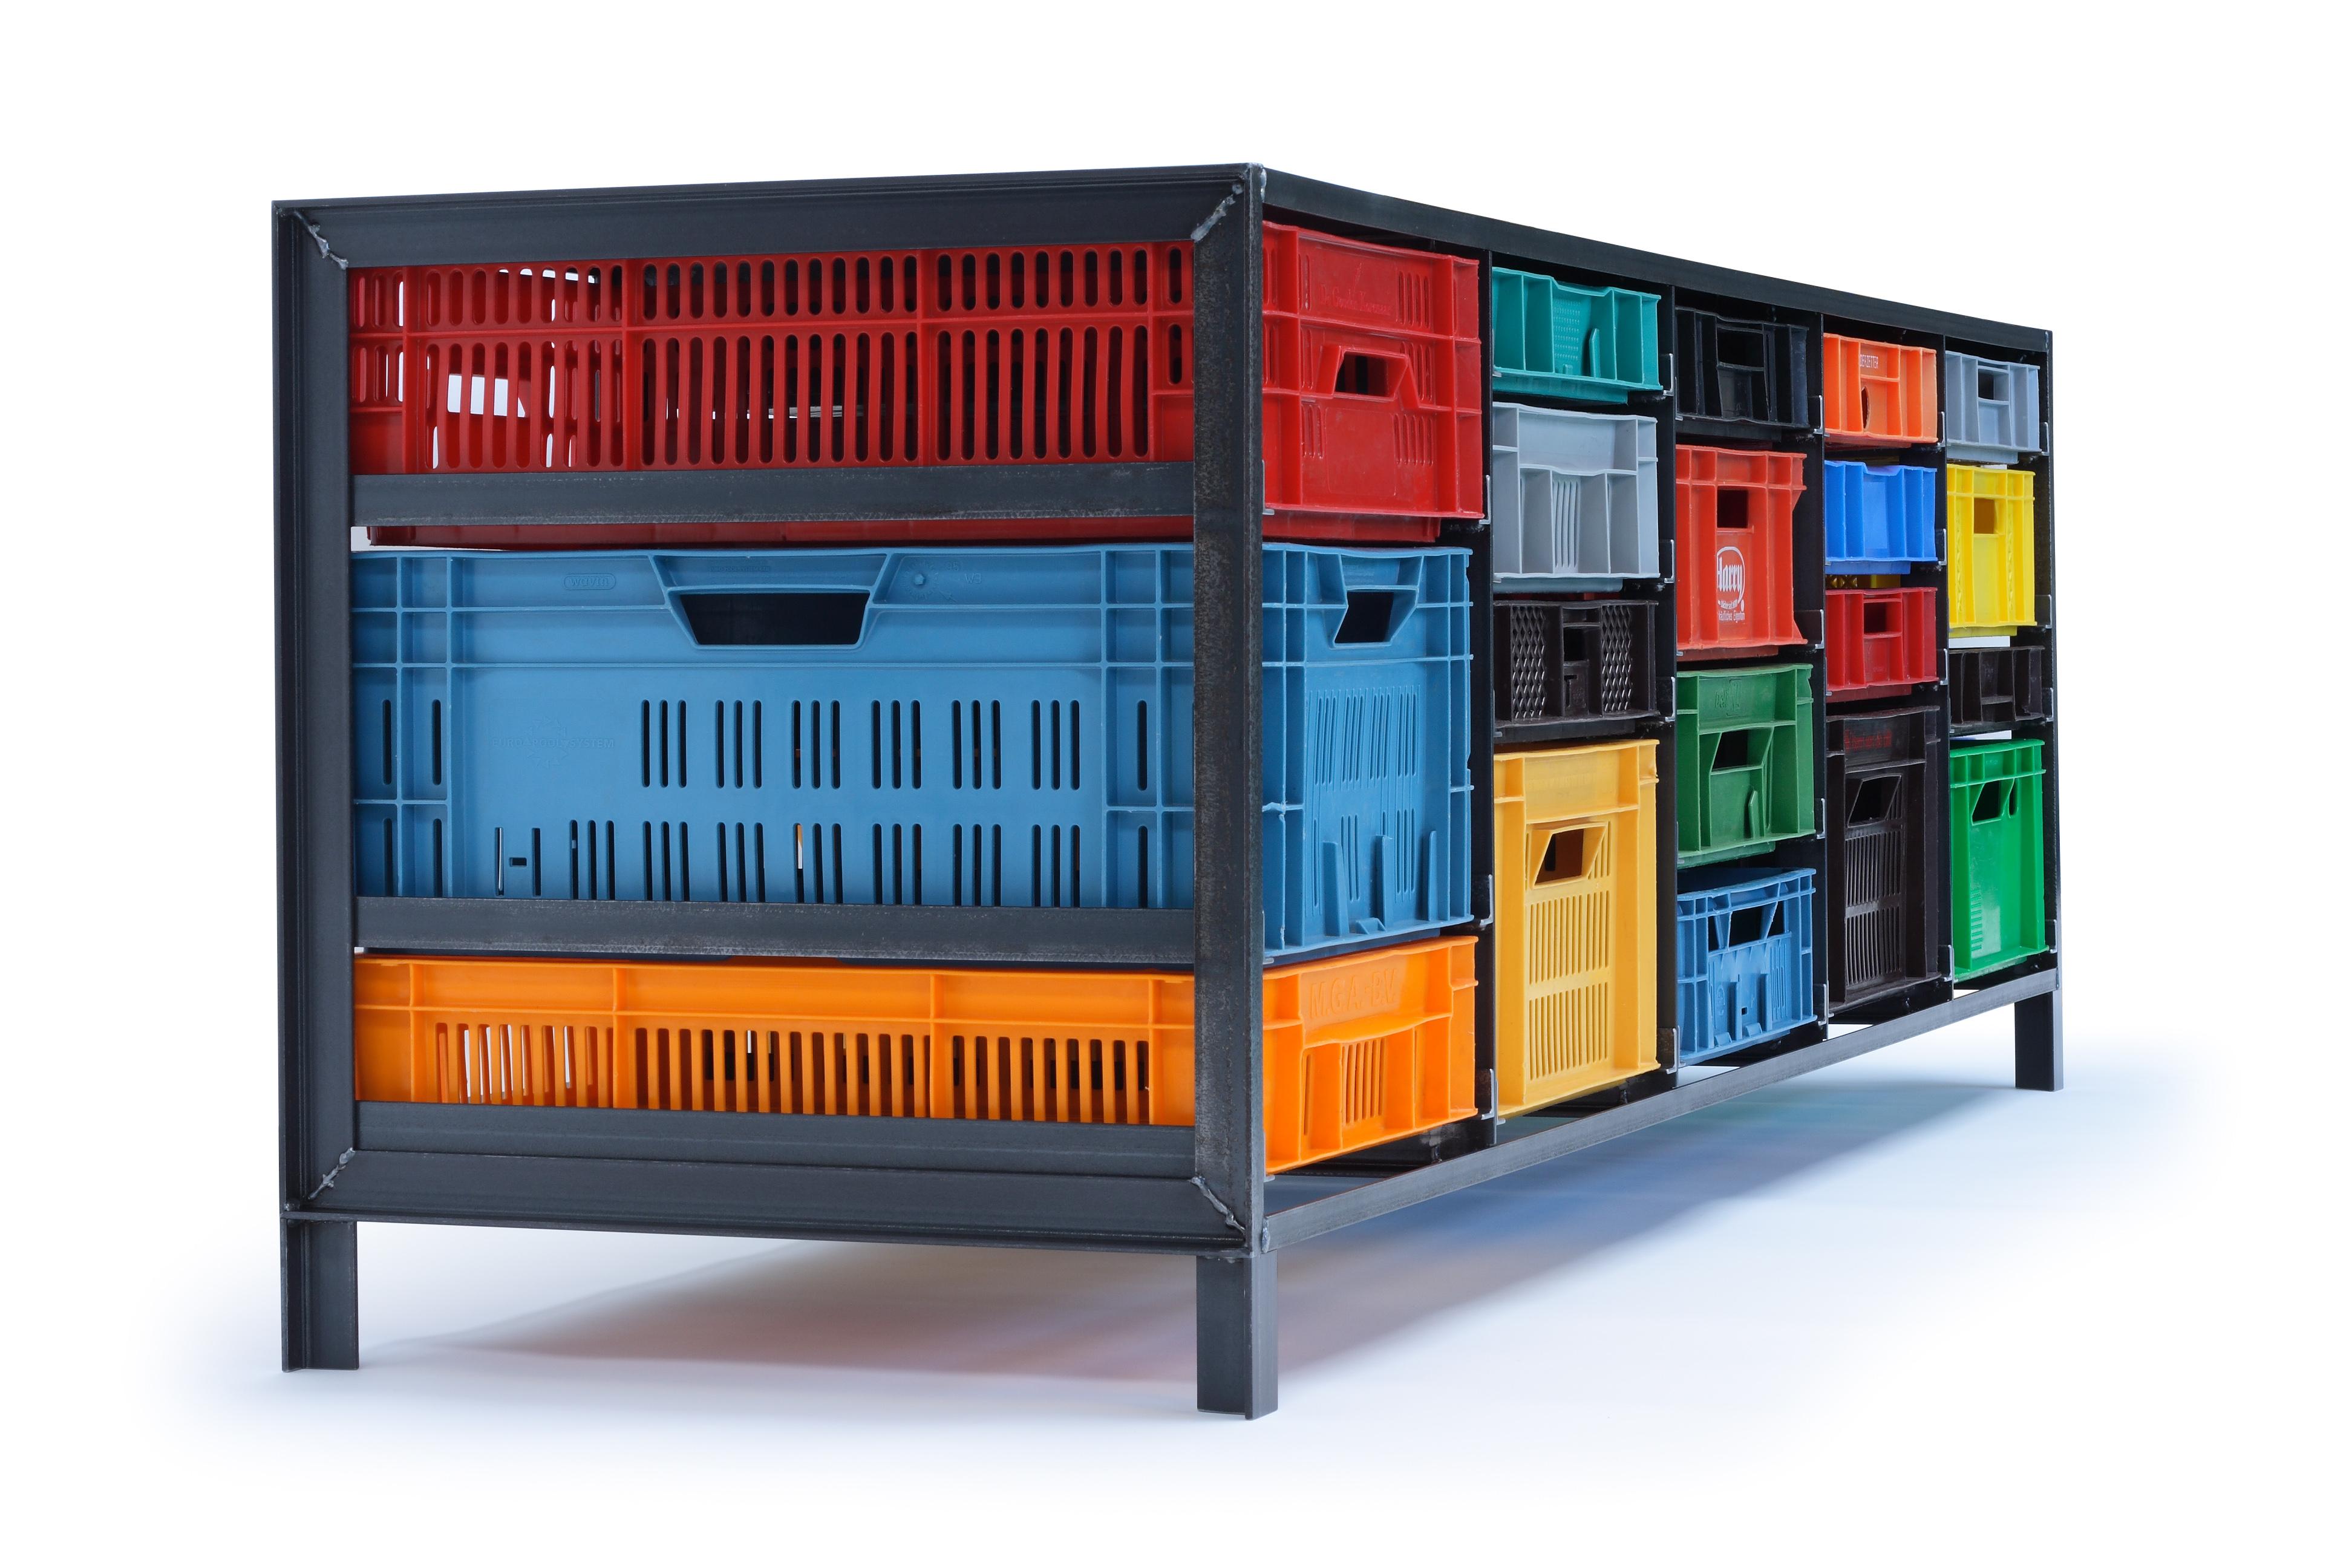 The series of cabinets, Krattenkast (crates cabinet), is a simple design concept: a steel frame with multicolored, second hand crates, which act as drawers in the steel construction. Although each crate is a different color, height and has